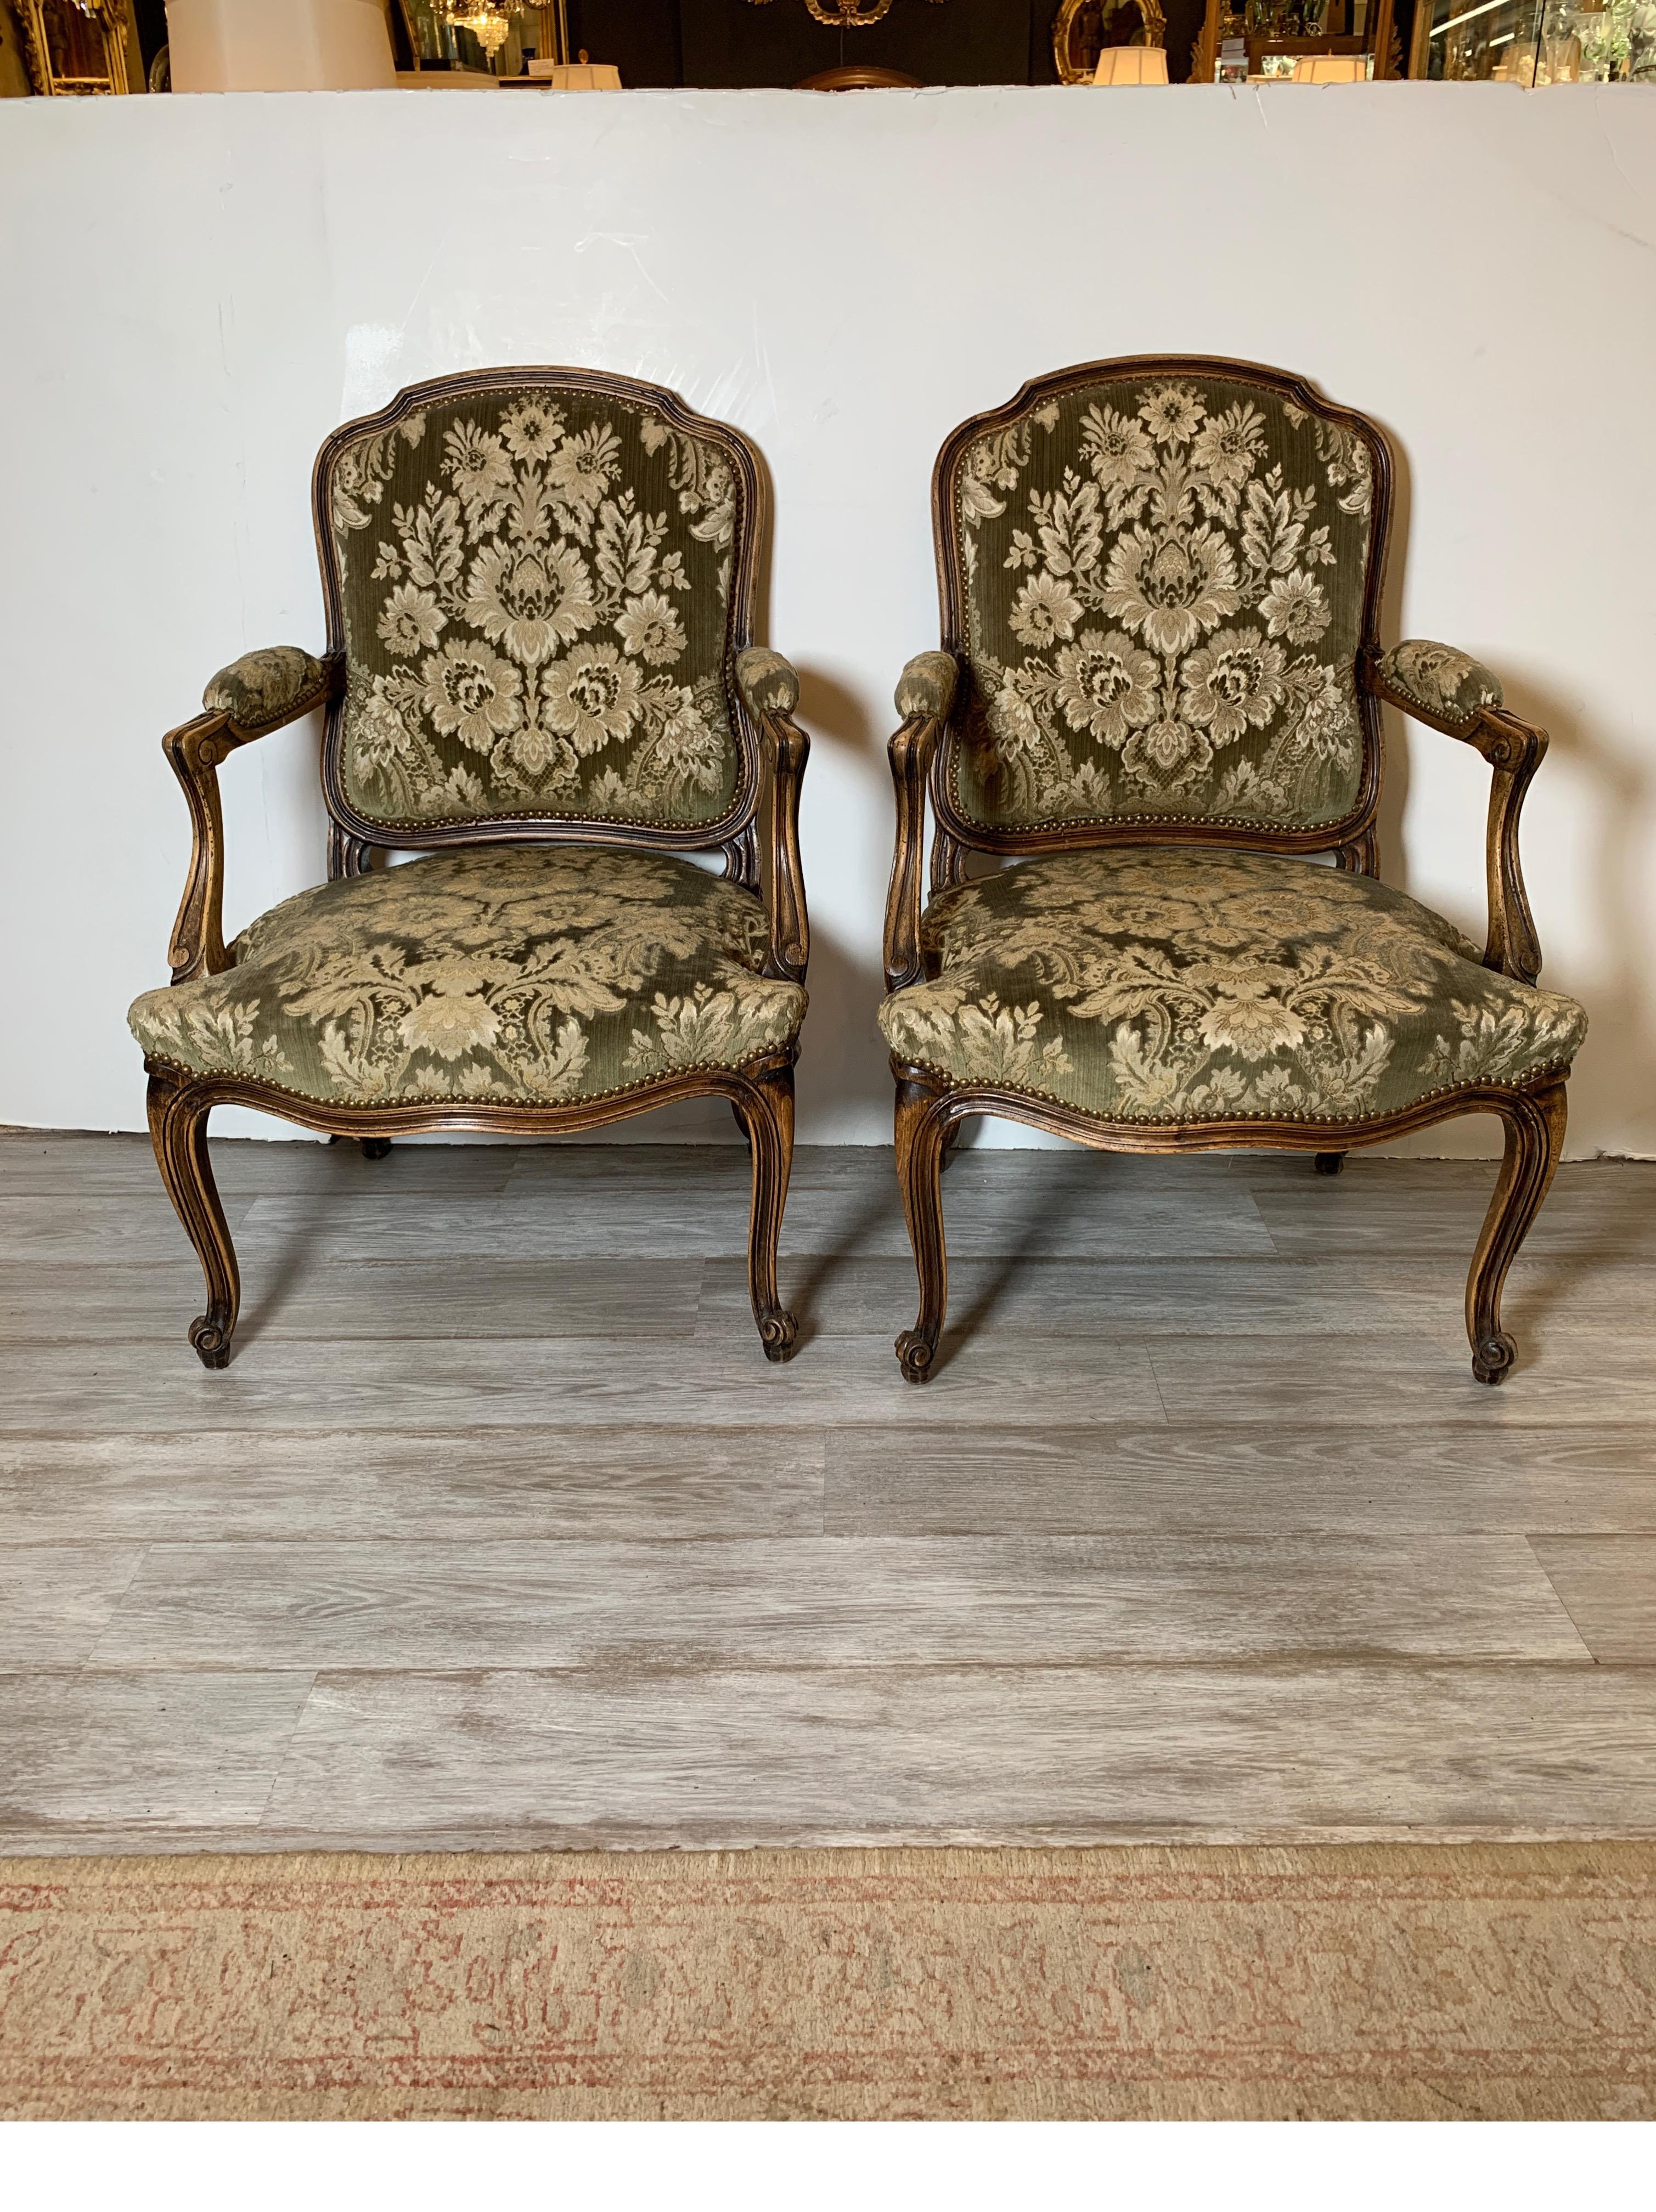 A Pair of French carved Fauteils chairs with Italian cut velvet damask upholstery. The sage green velvet with soft gold damask with aged brass nailhead trim. The wood frame with a natural original worn finish. The seats are constructed with an 8 way